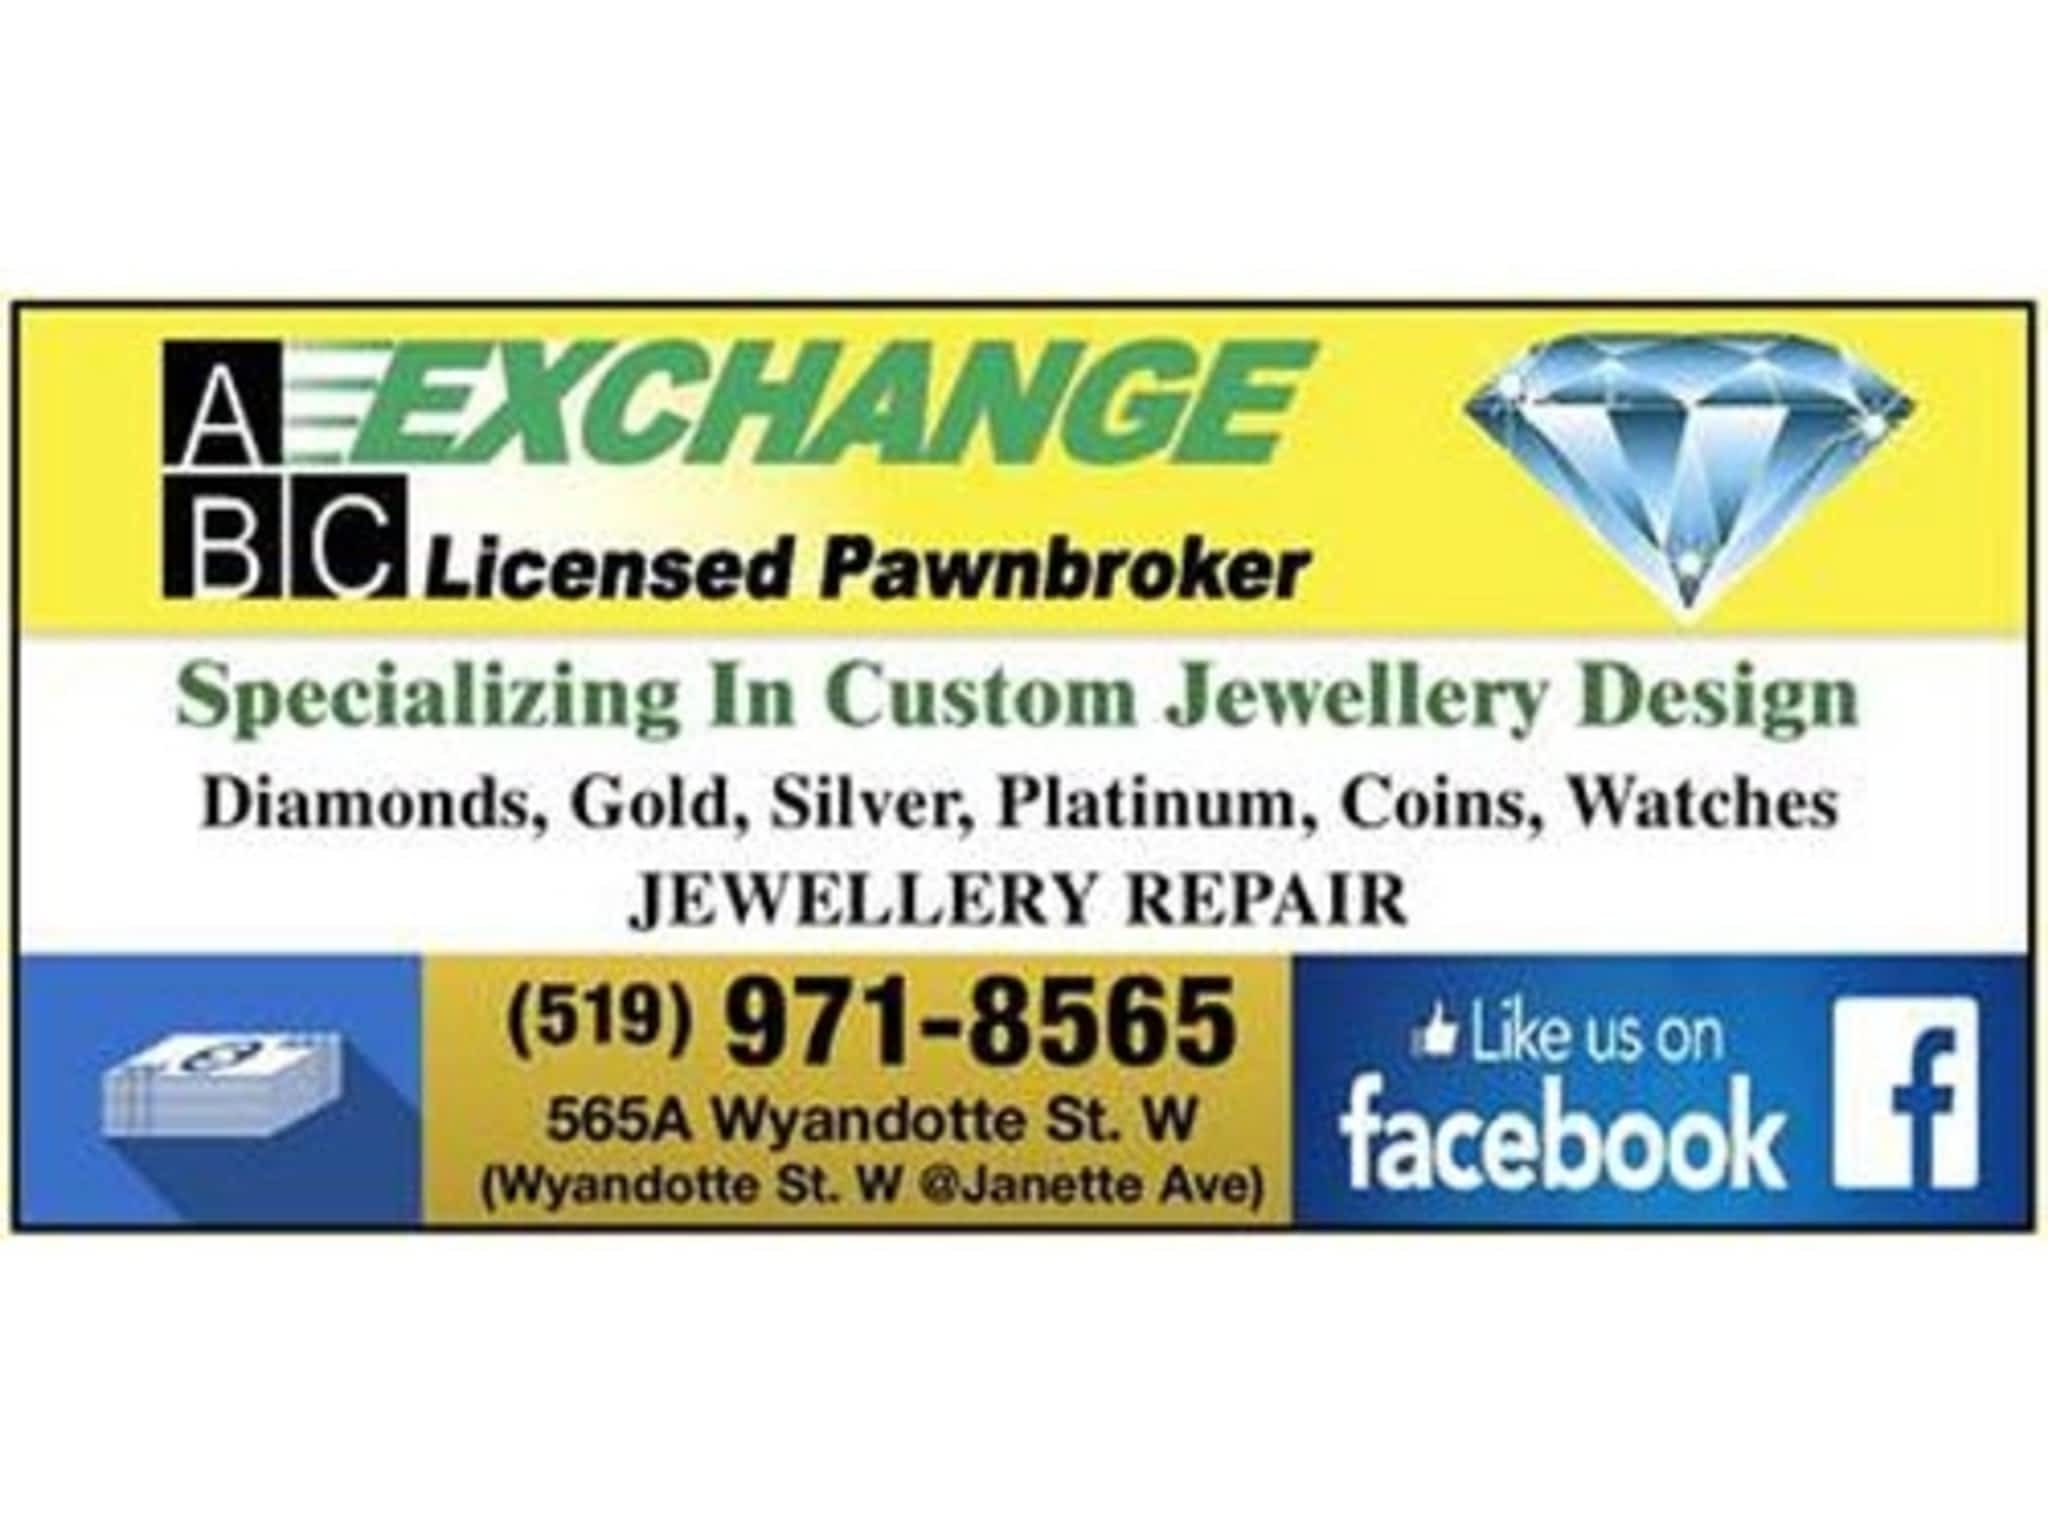 photo ABC Exchange Jewelery and Cash Licensed Pawnbroker